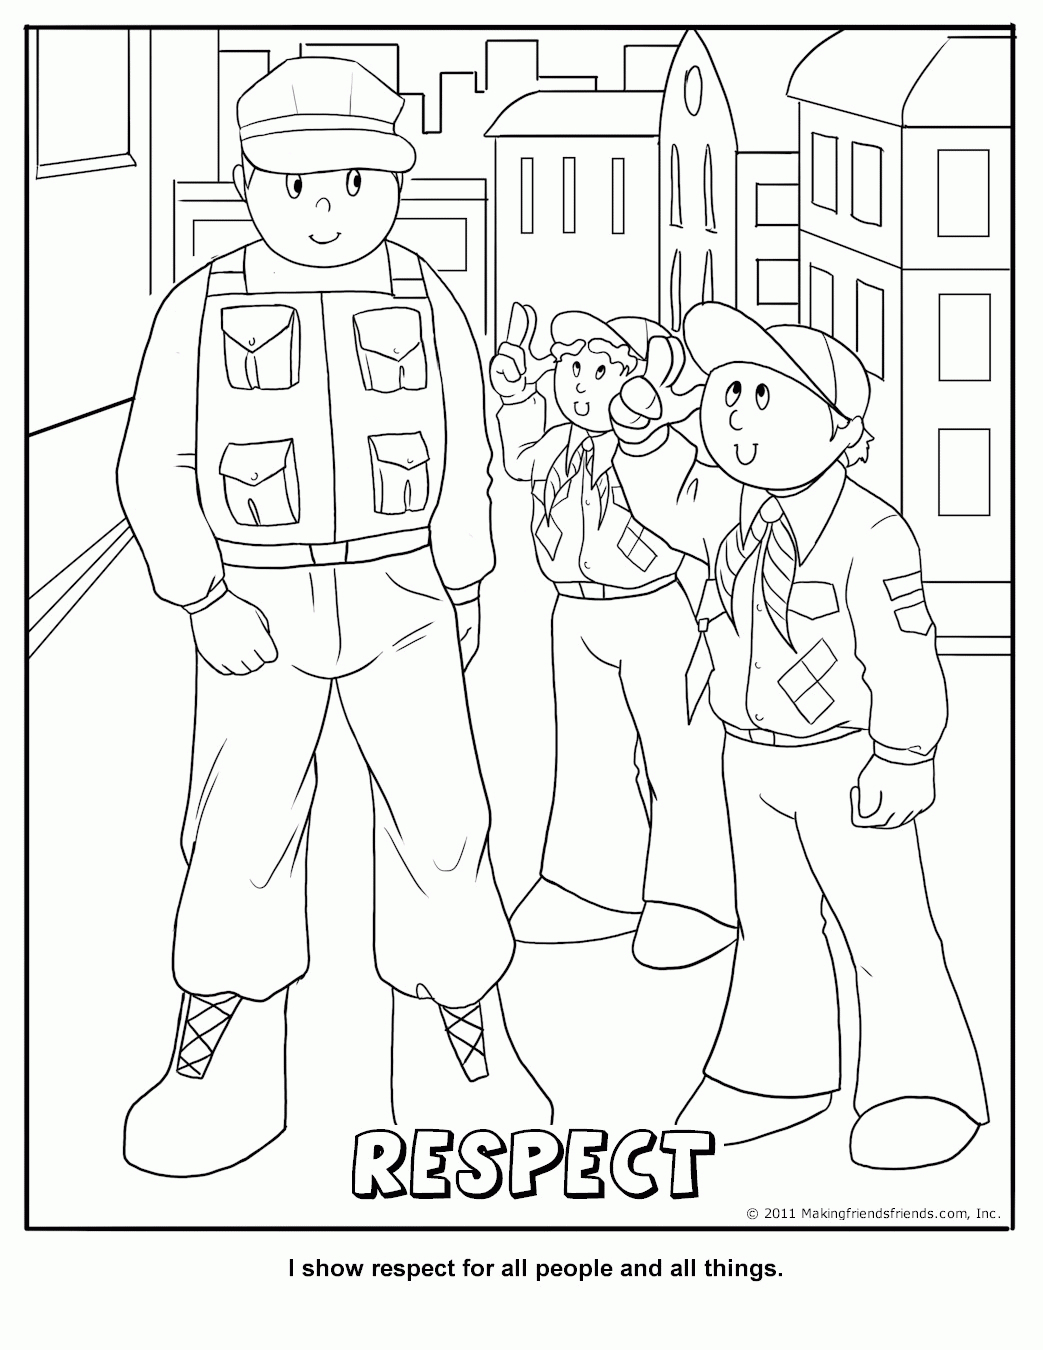 Respect Coloring Pages Free - Coloring Home - Free Printable Coloring Pages On Respect